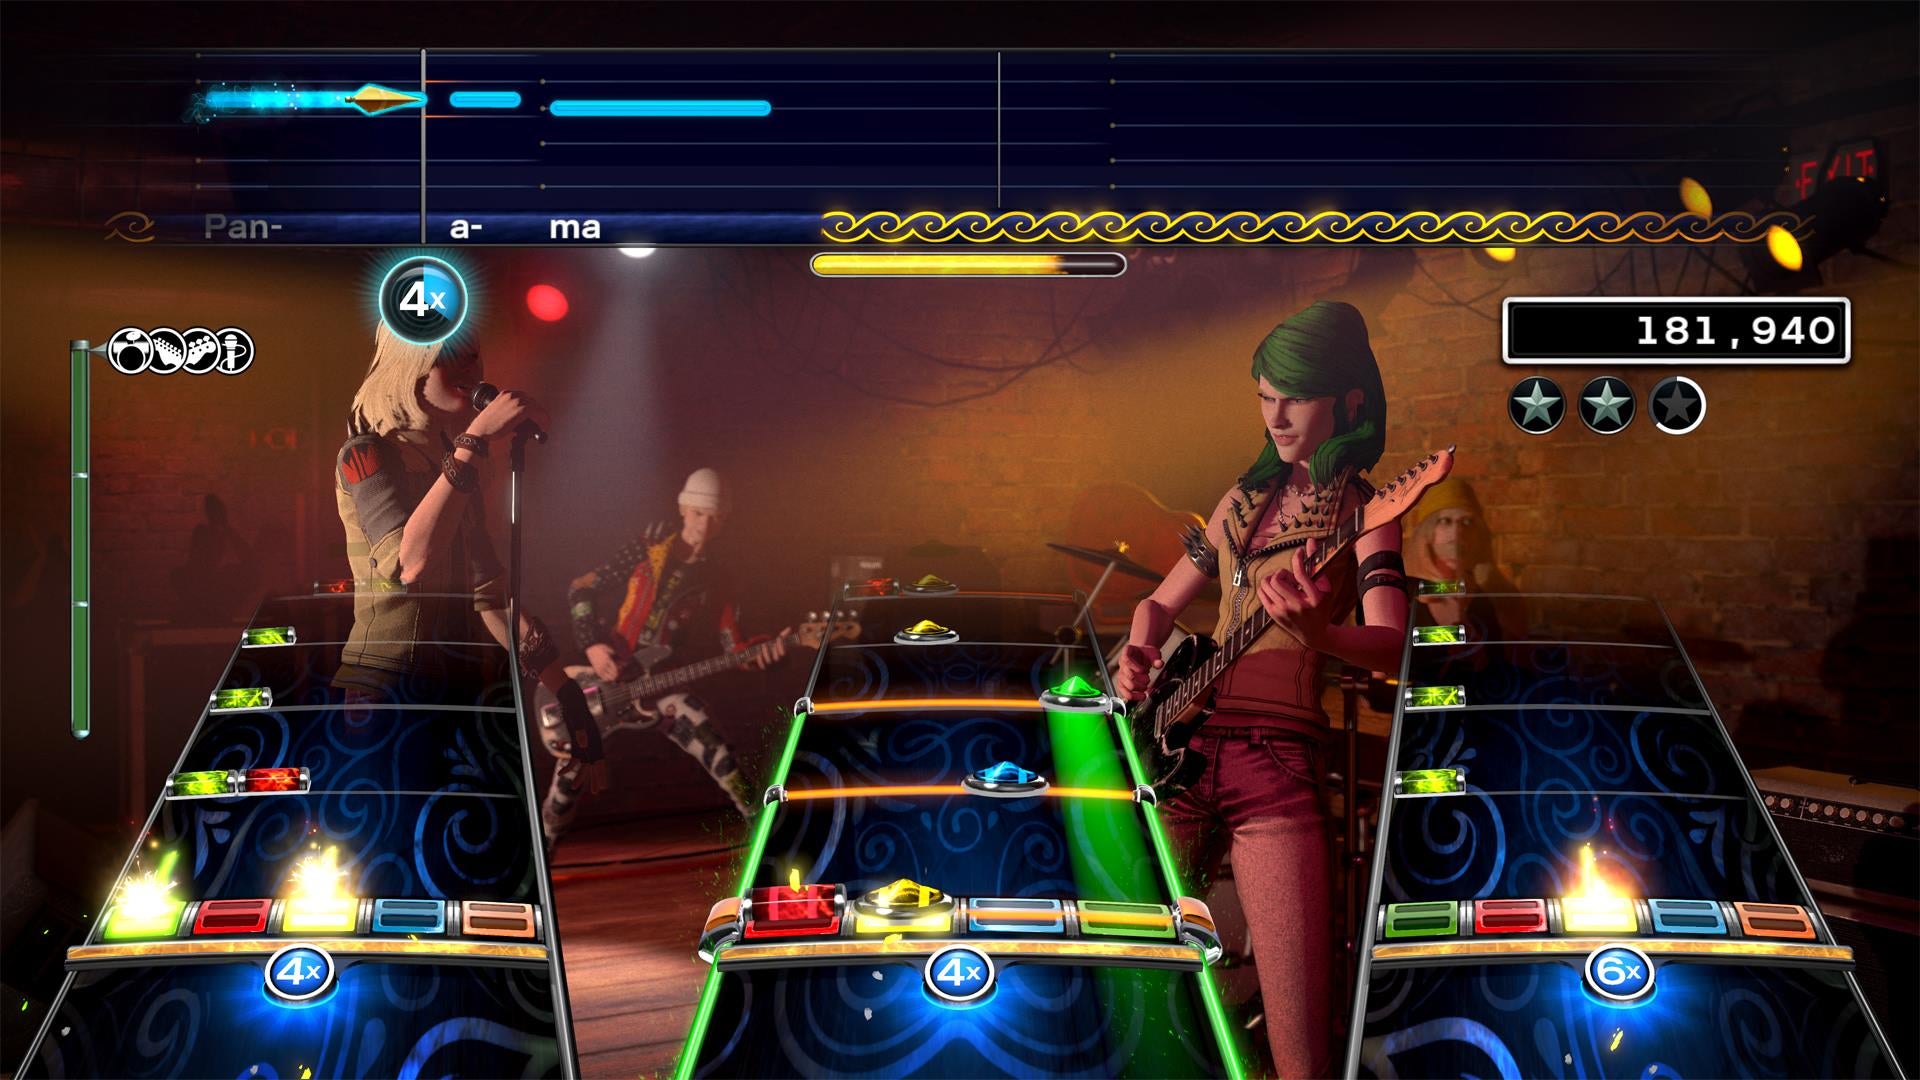 Image for For the first time ever, Van Halen comes to Rock Band 4